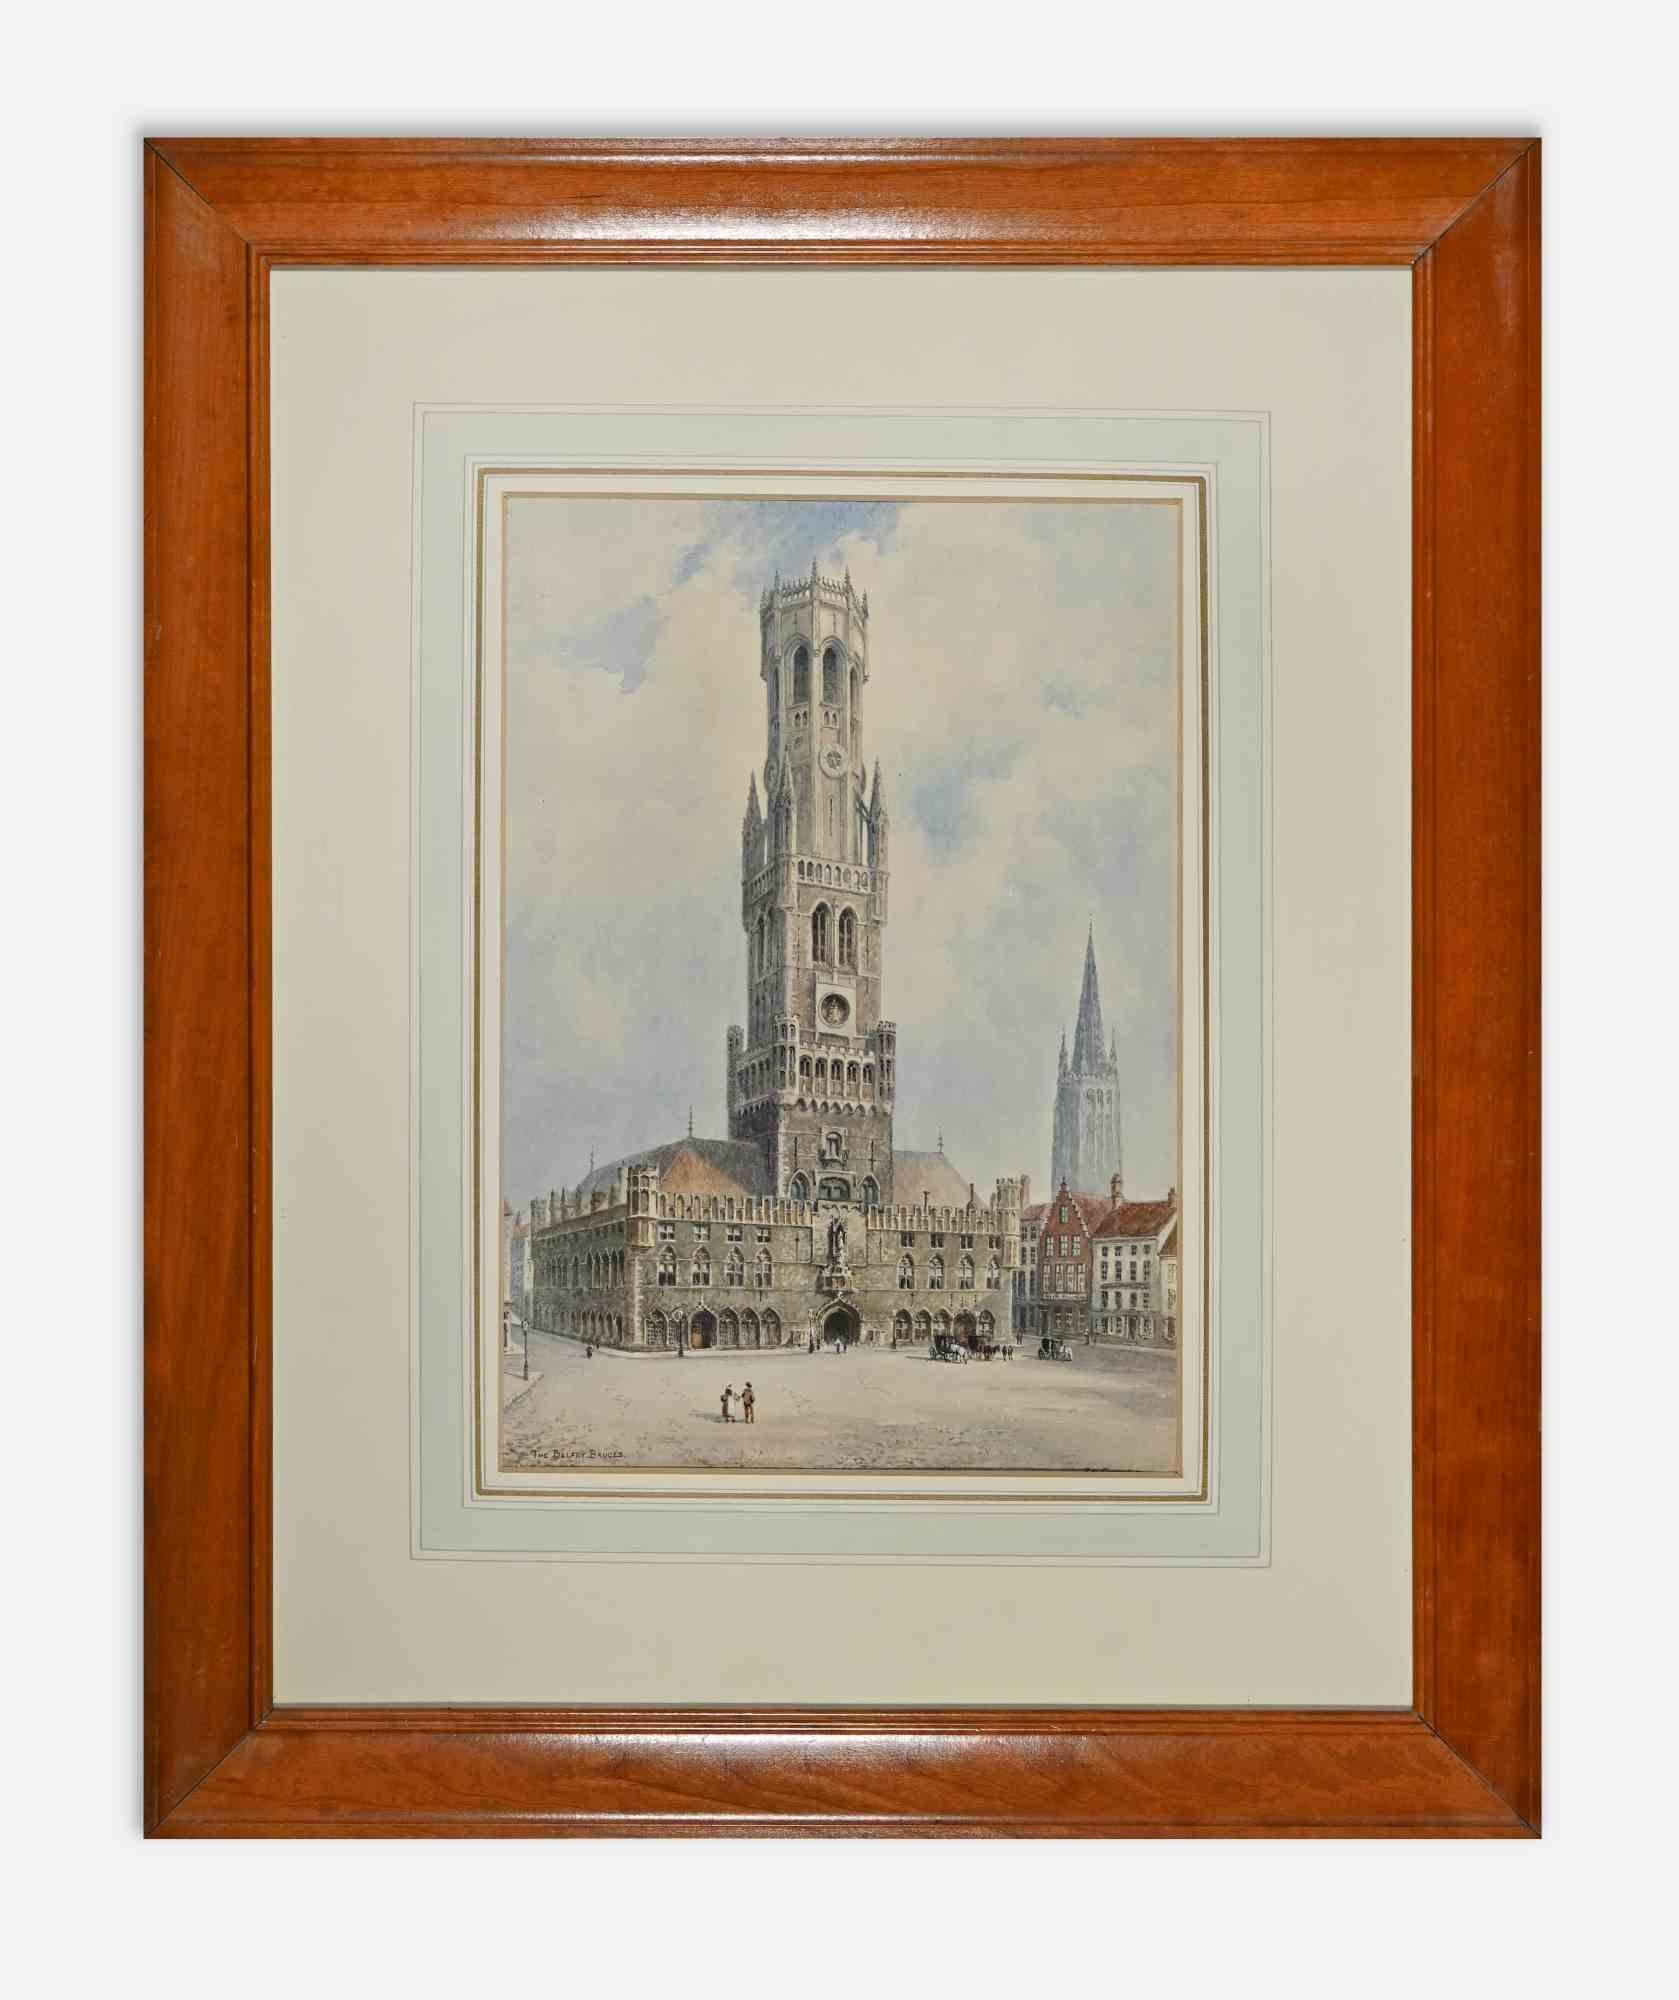 View of Belfry Bruges is an original modern artwork realized by Albert Henry Findley (1880-1975) in the early 20th Century.

Mixed colored watercolor on paper.

Titled on the lower left margin.

Includes wooden frame: 68.5 x 56 cm

Albert H. Findley